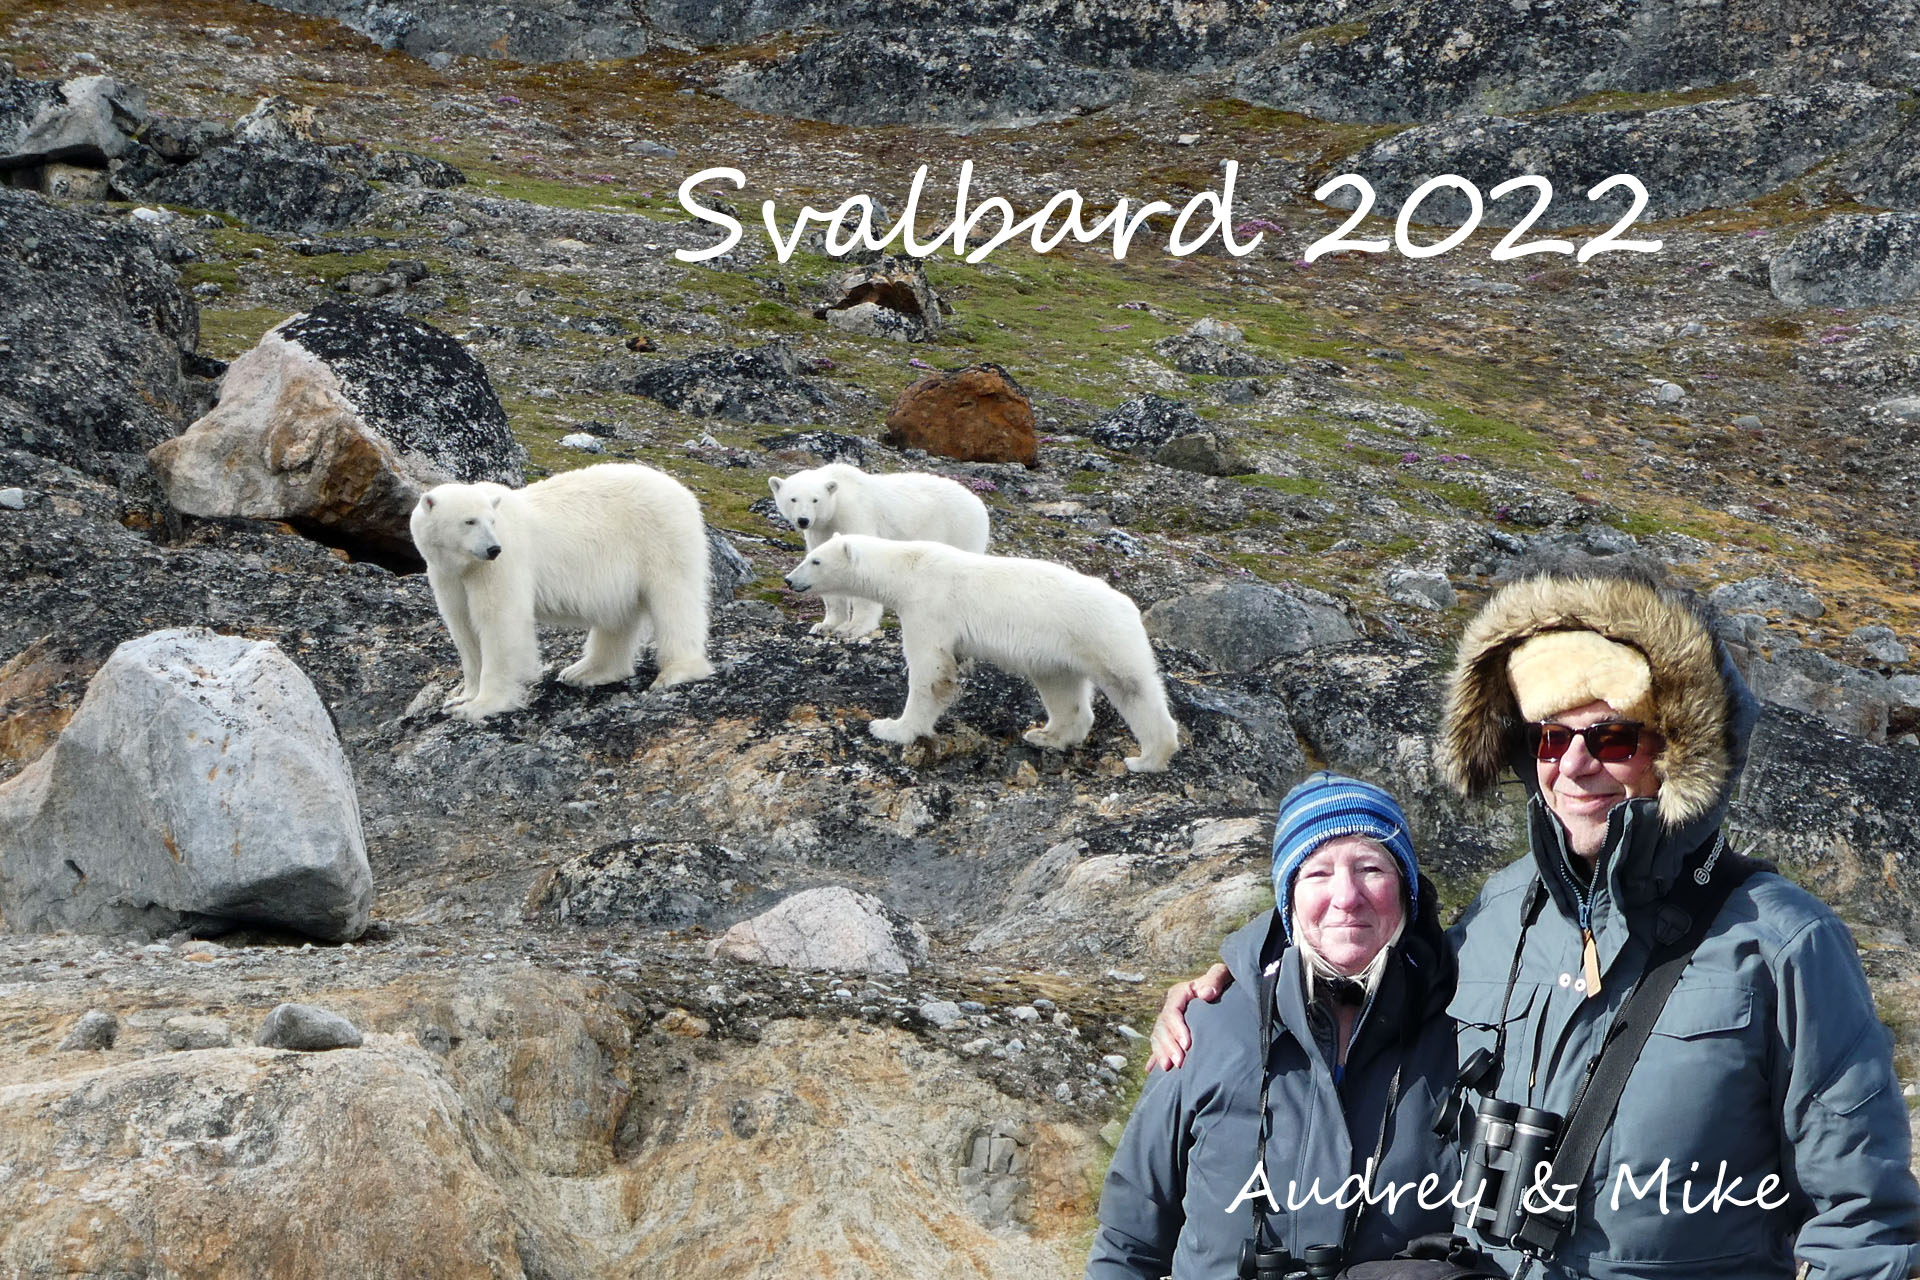 Click to View the Svalbard Photo Slide Show